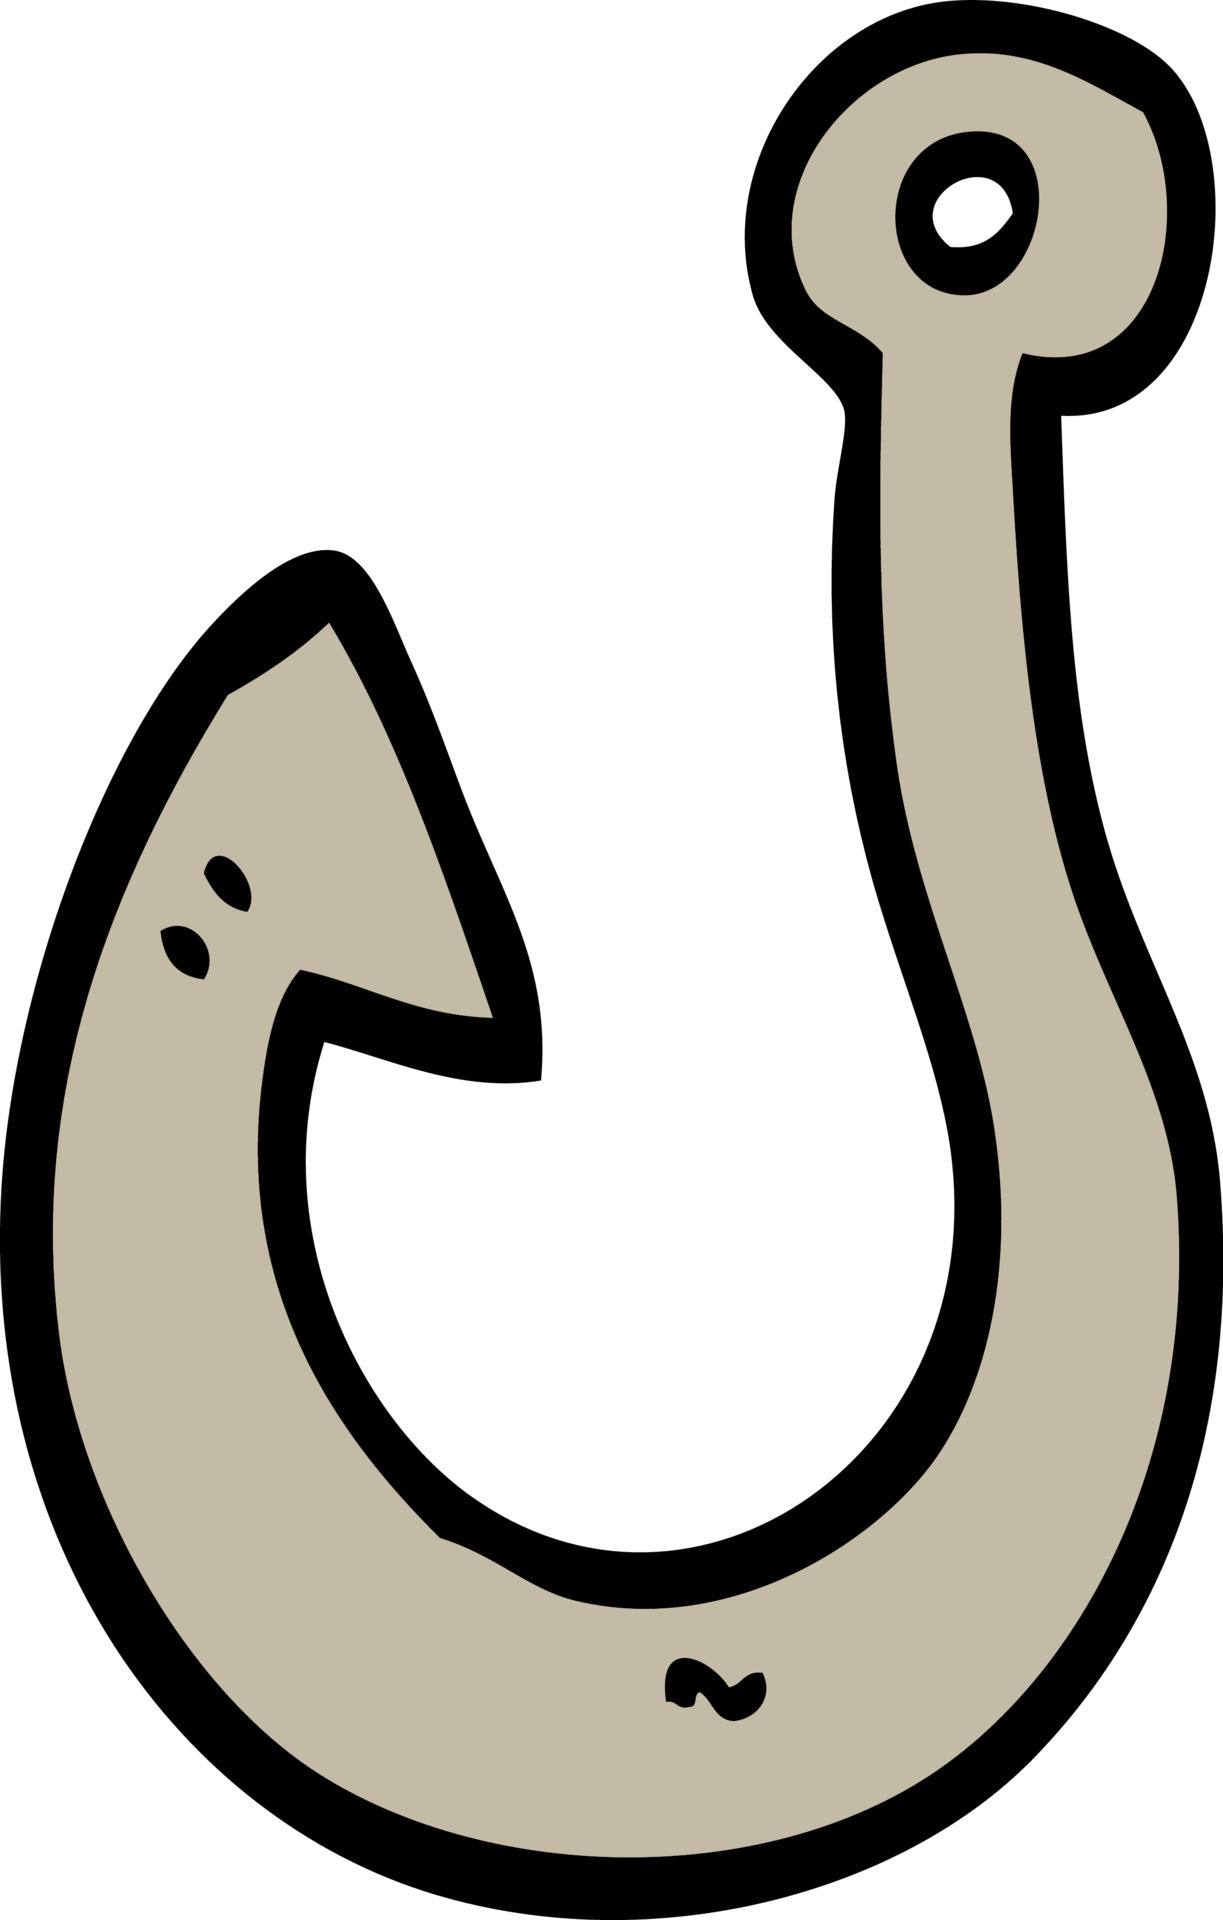 https://static.vecteezy.com/system/resources/previews/012/406/165/original/hand-drawn-doodle-style-cartoon-fish-hook-free-vector.jpg